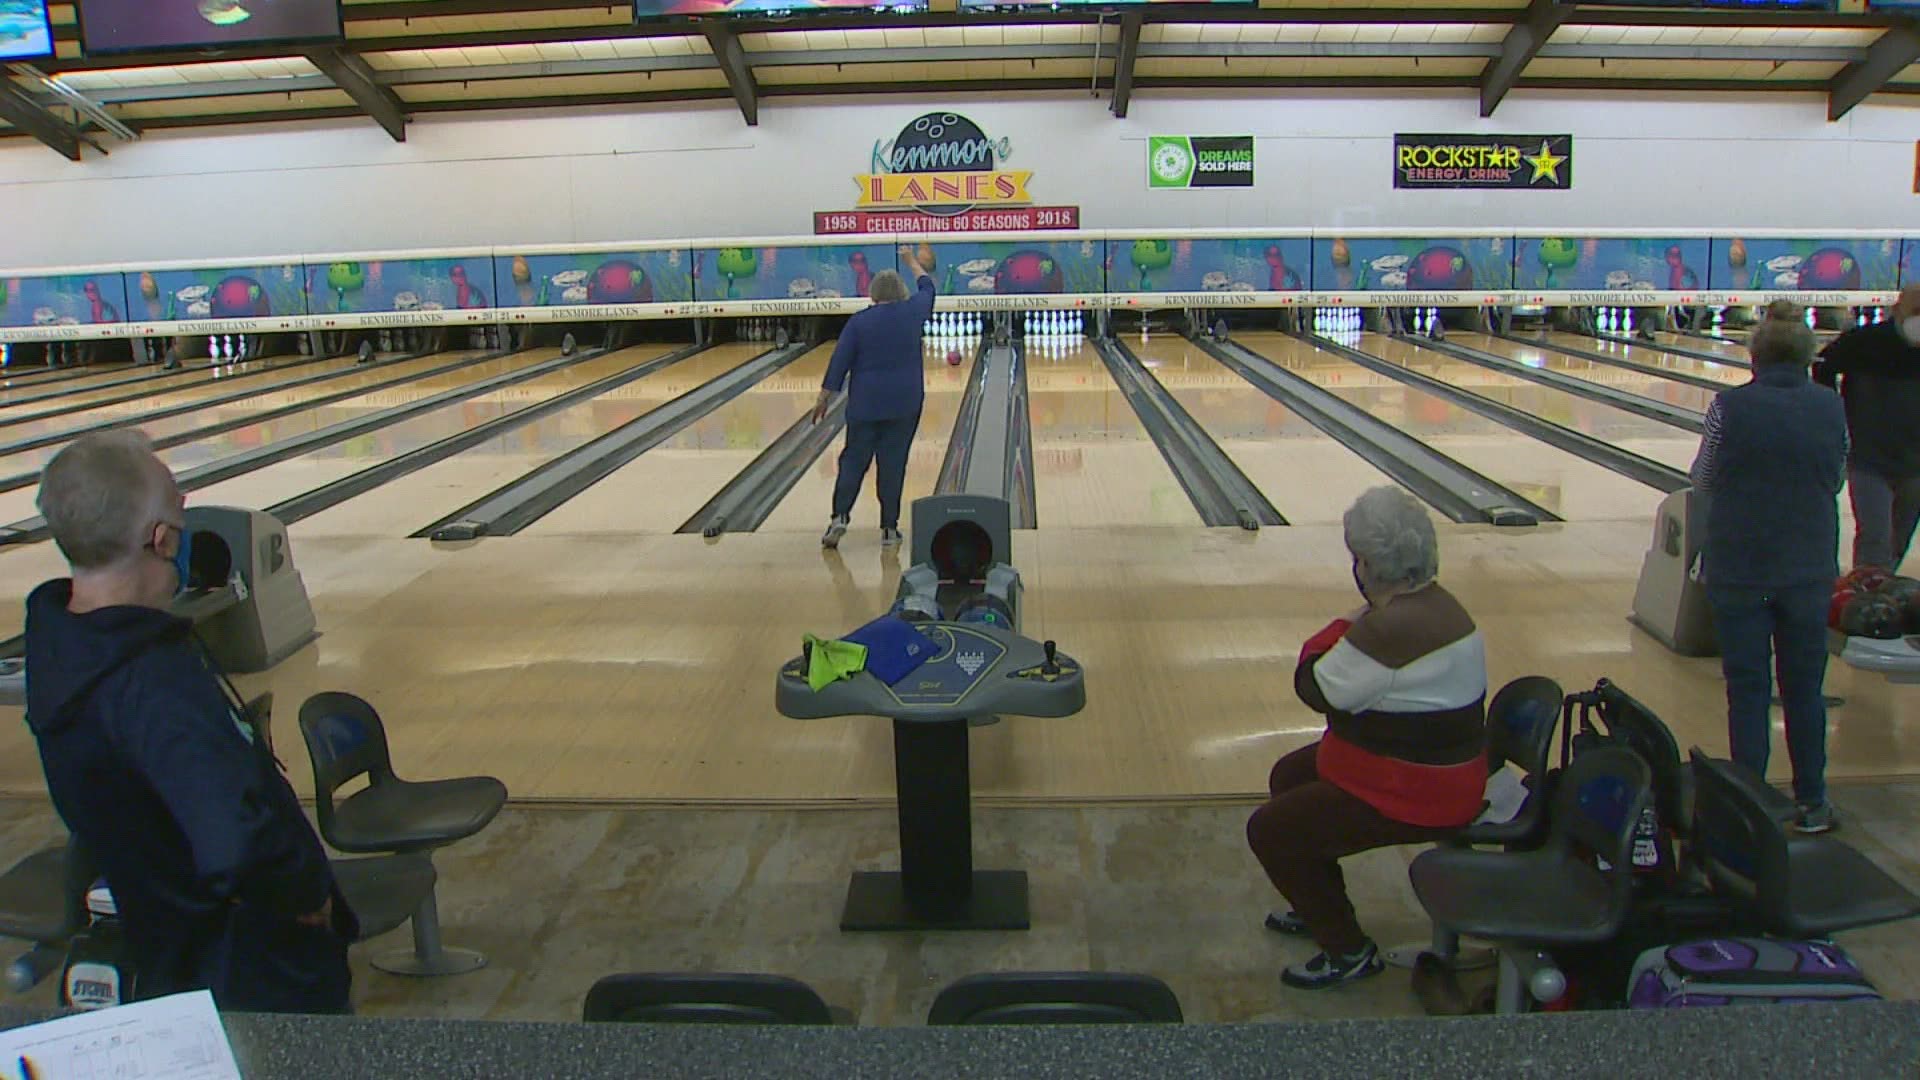 Kenmore Lanes didn't spare any time reopening when Phase 3 started in Washington Monday.